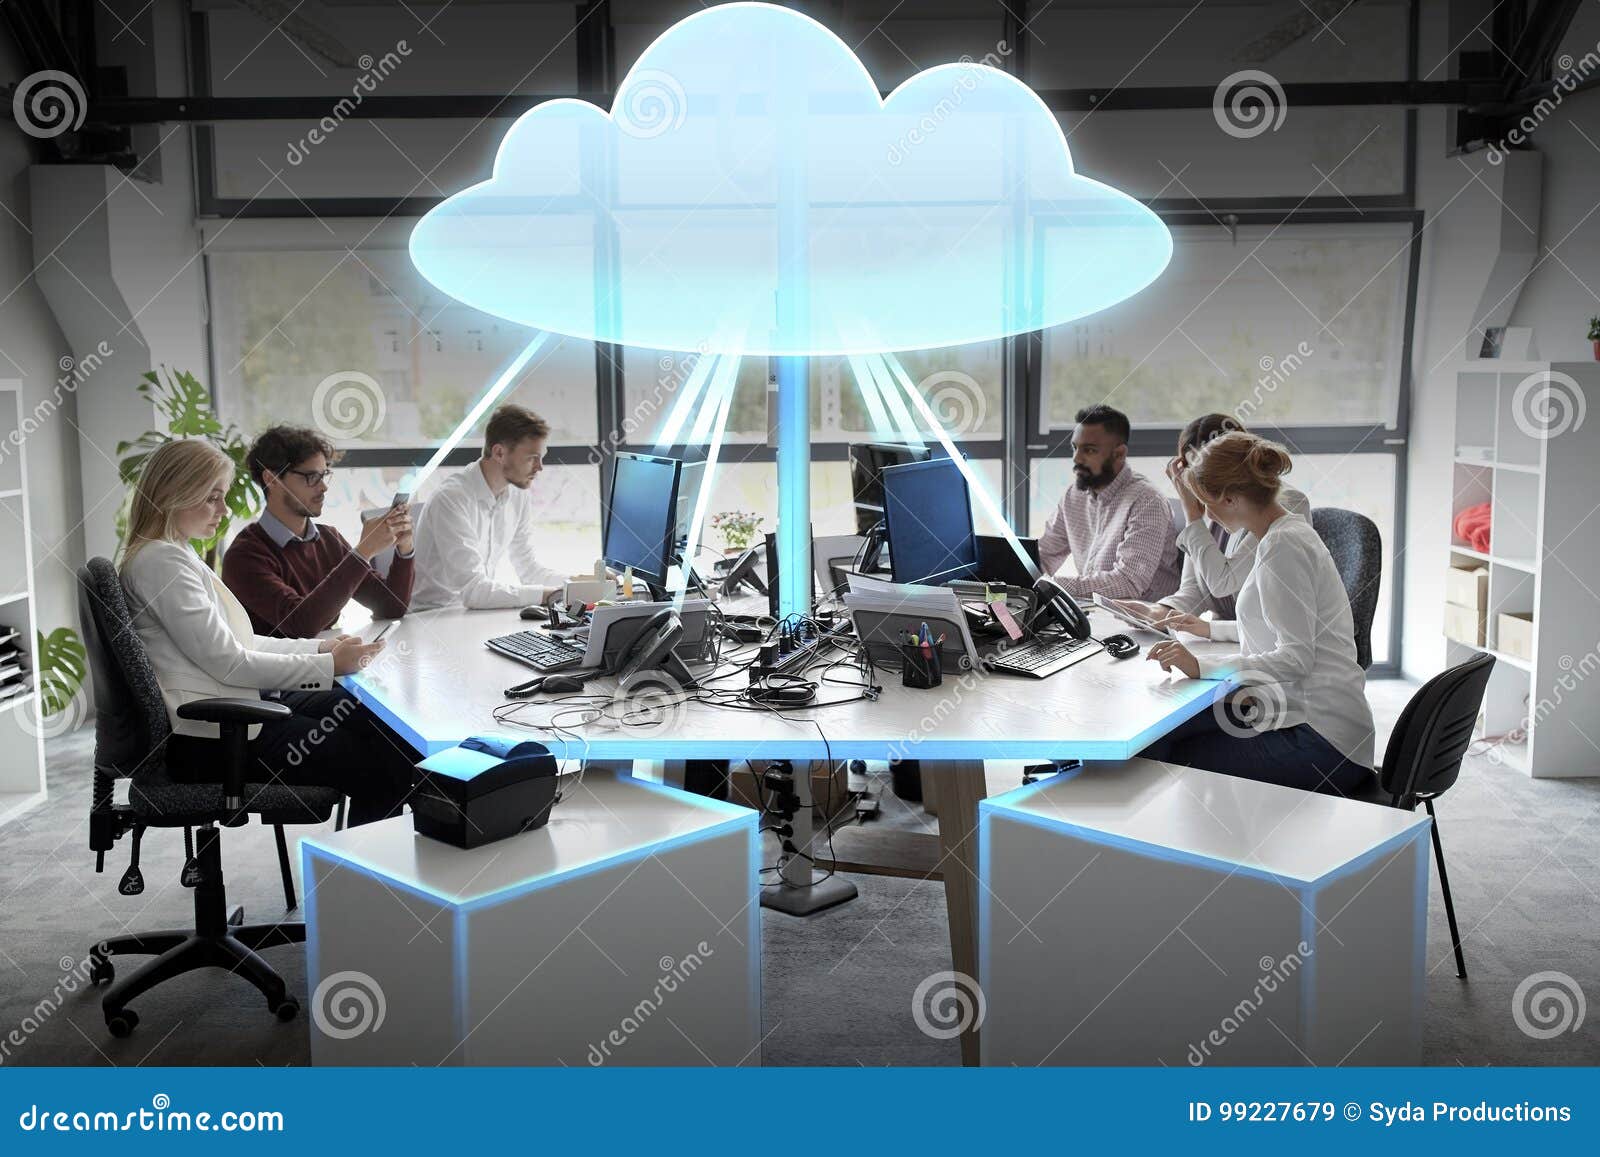 business team with cloud computing hologram